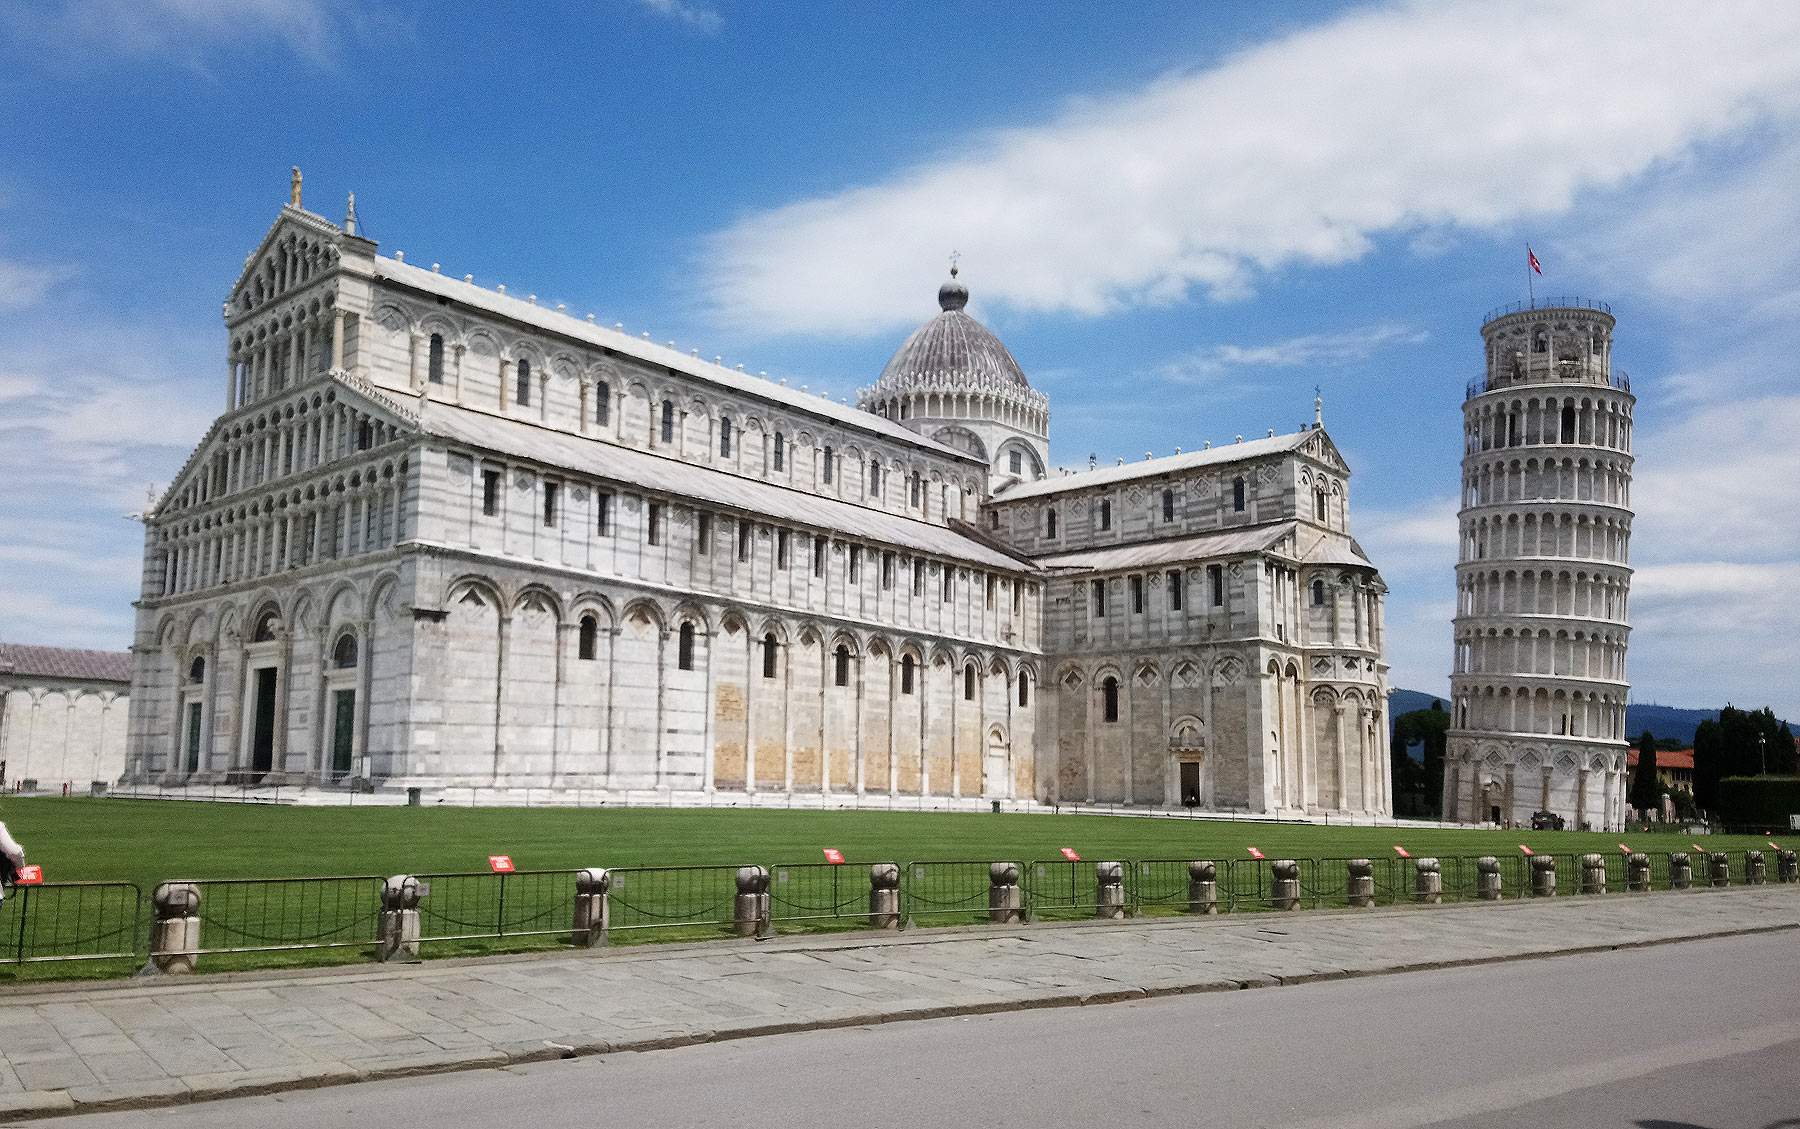 Drone crashes into the Leaning Tower of Pisa, no damage. Two tourists fined